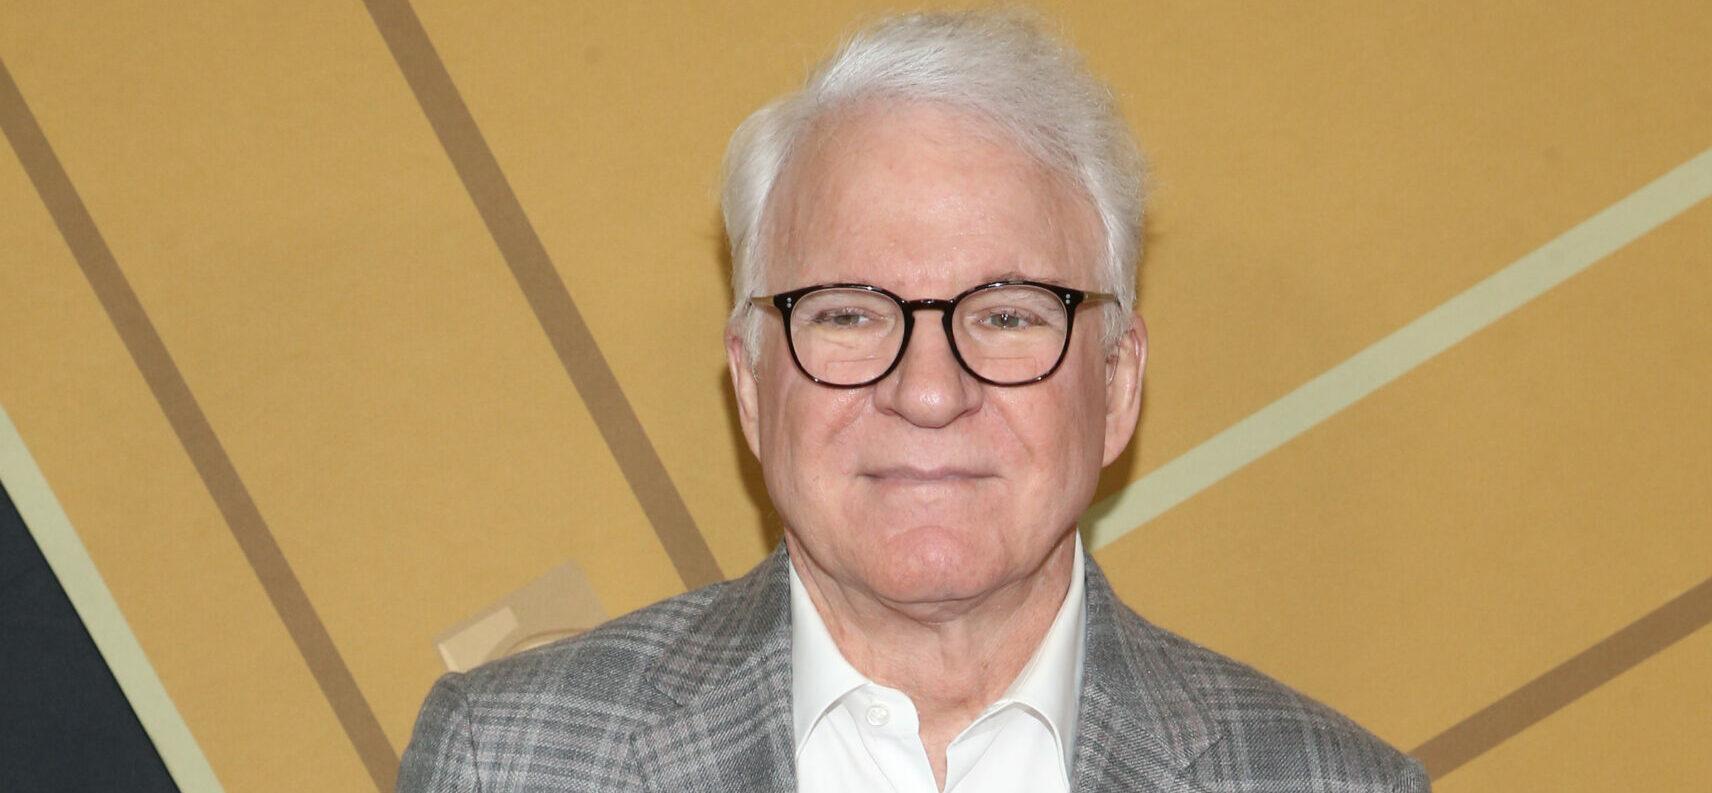 Steve Martin Hopes To Dial It Down, But ‘Really Not Interested In Retiring’